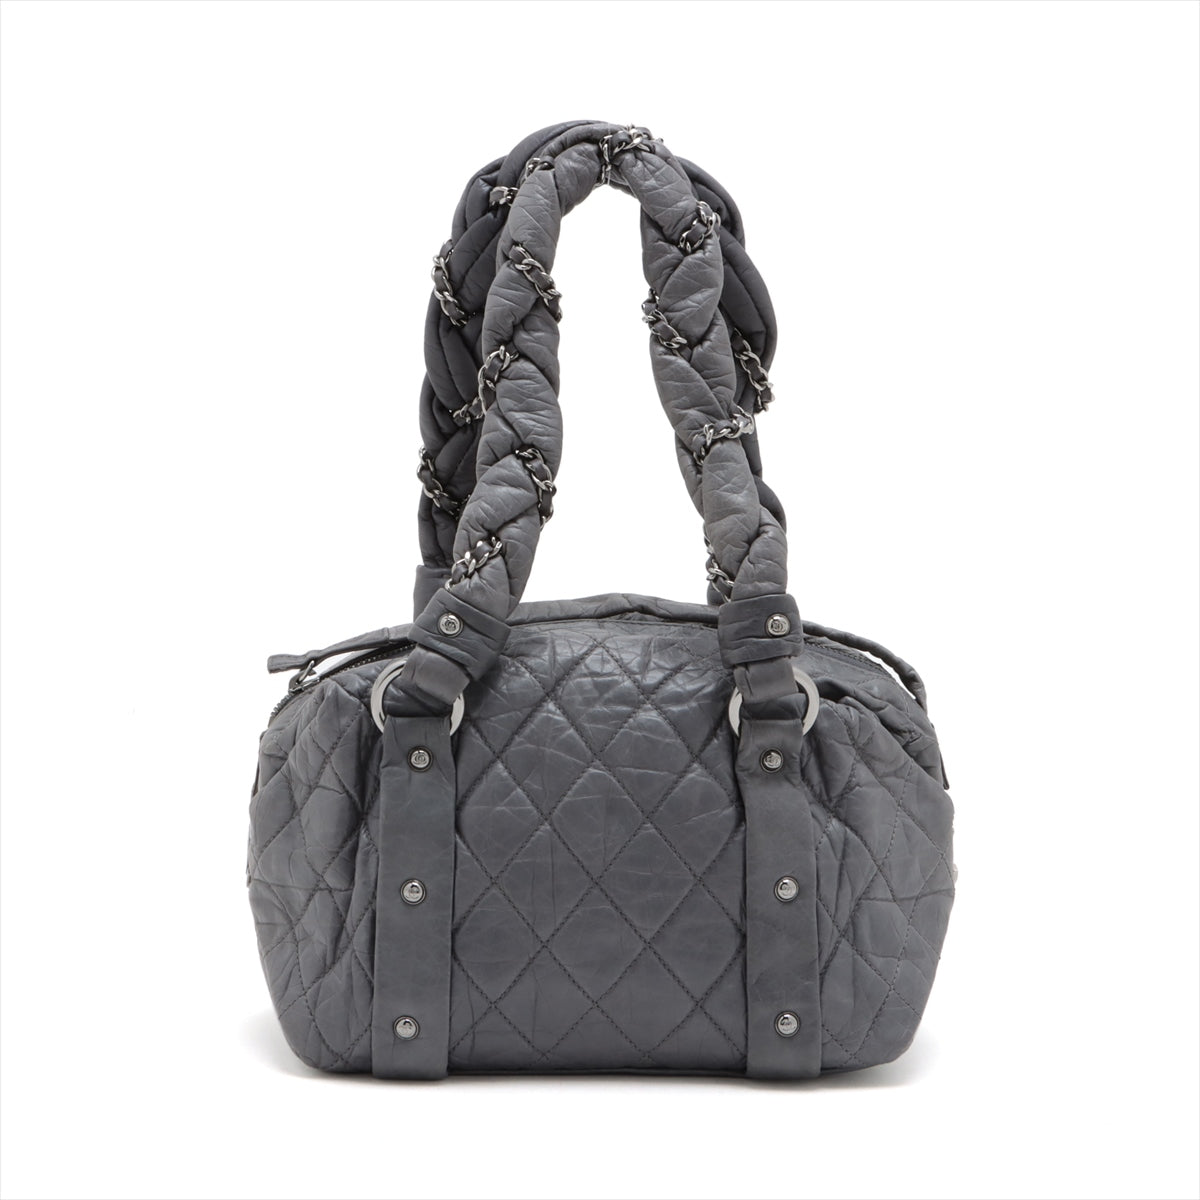 Chanel Matelasse Leather Hand bag Grey Silver Metal fittings 10XXXXXX